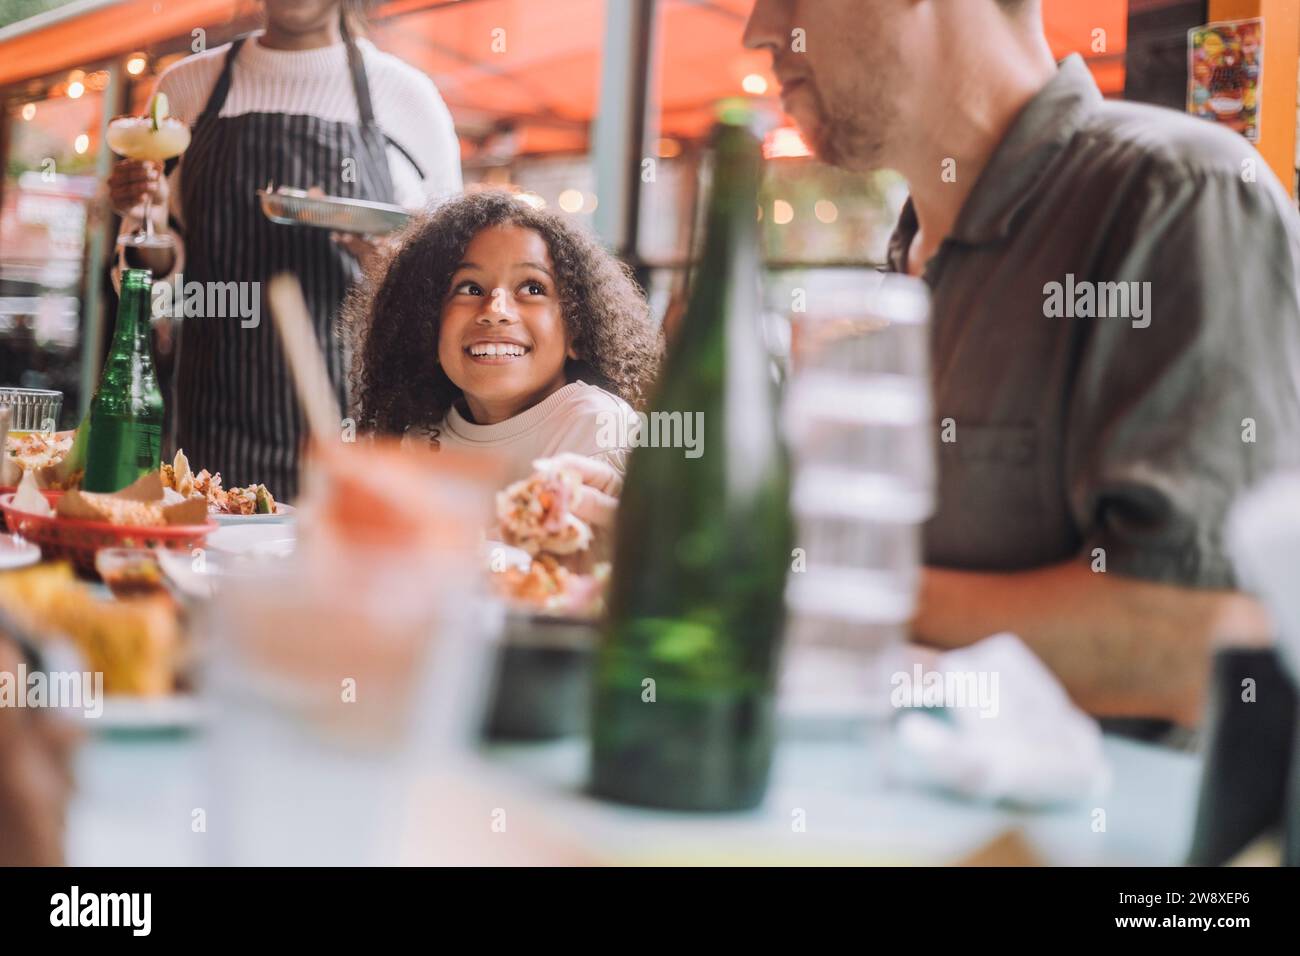 Smiling girl having food with father while sitting at restaurant Stock Photo